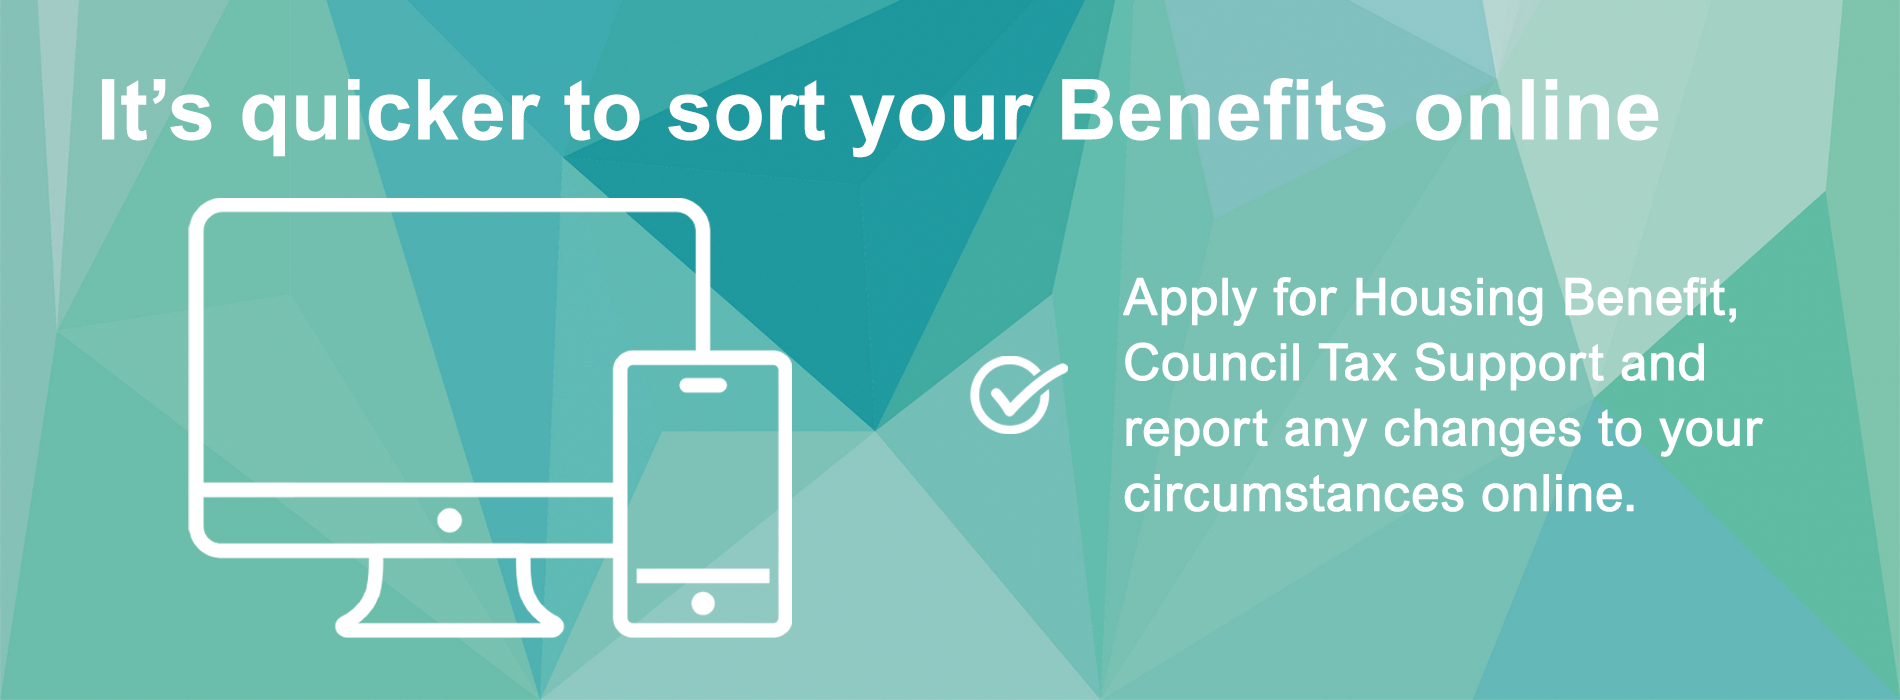 Sort your Benefits online with My South Cambs